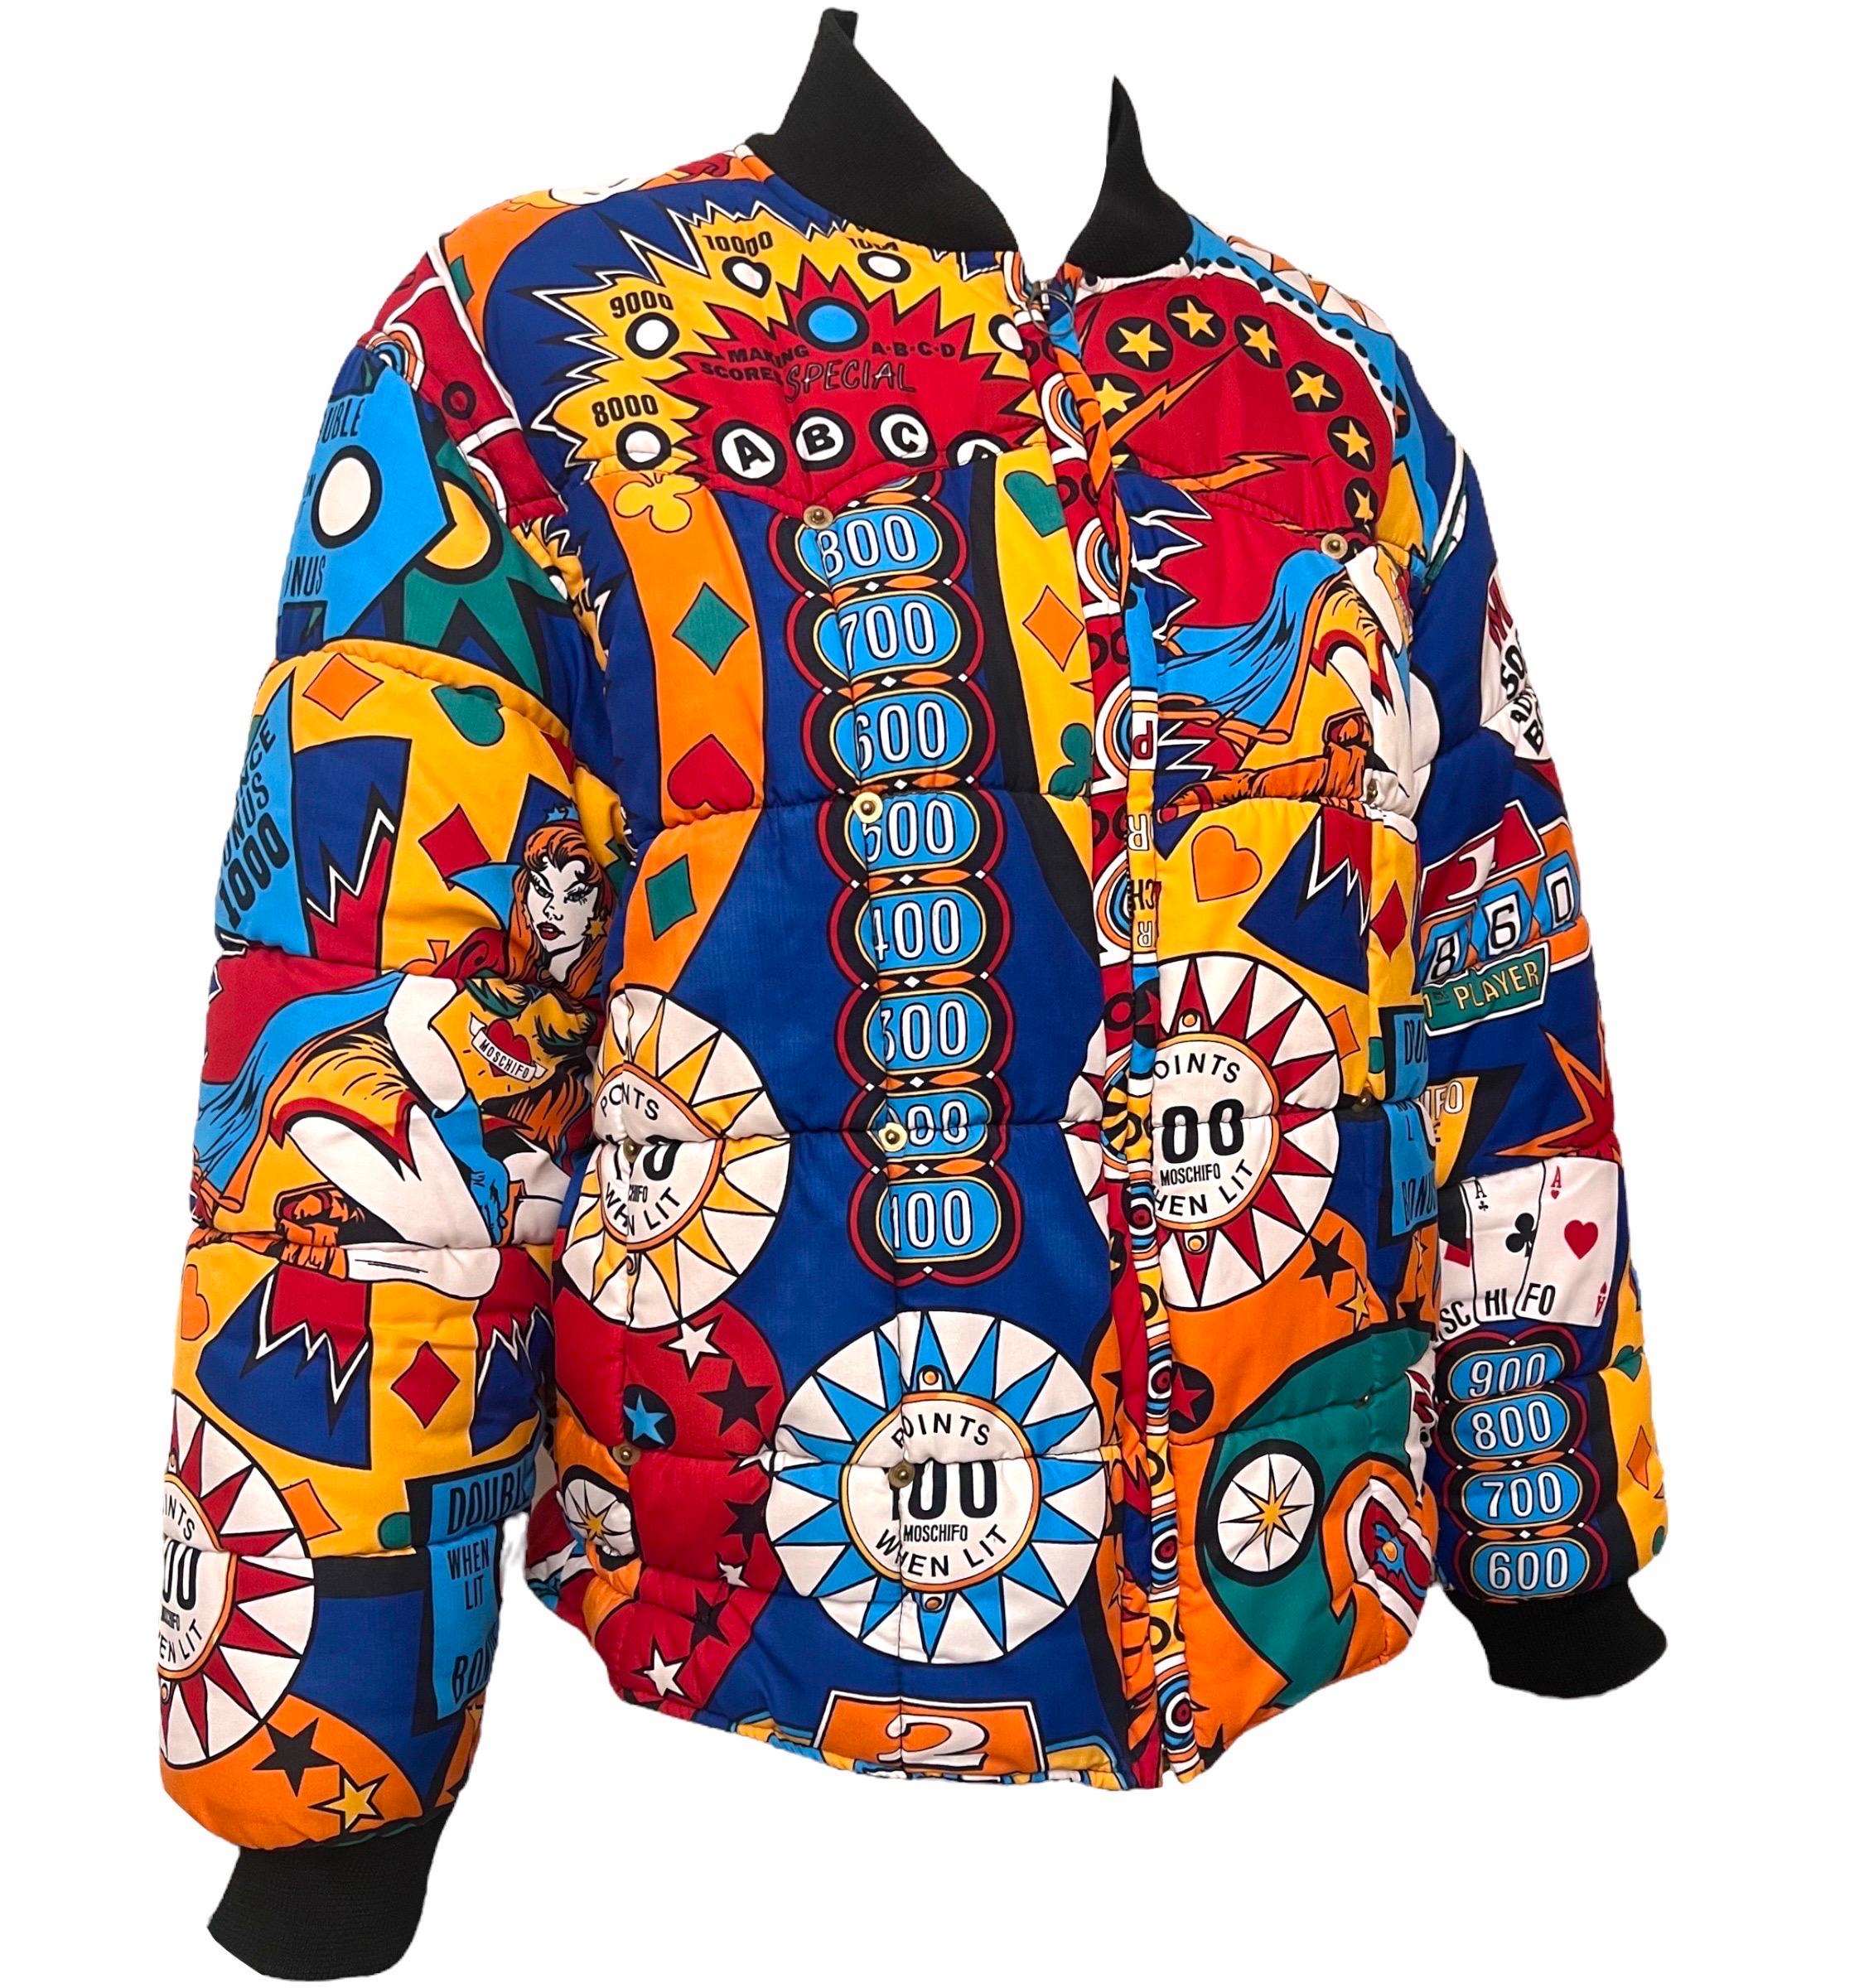 Whimsical Moschino Jeans puffer coat from the 90's. This jacket is printed throughout with a pop art pinball print.
Stretchy knit collar and cuffs.

Size: US 8

Condition: This coat is in excellent condition throughout. The initial heart-shaped